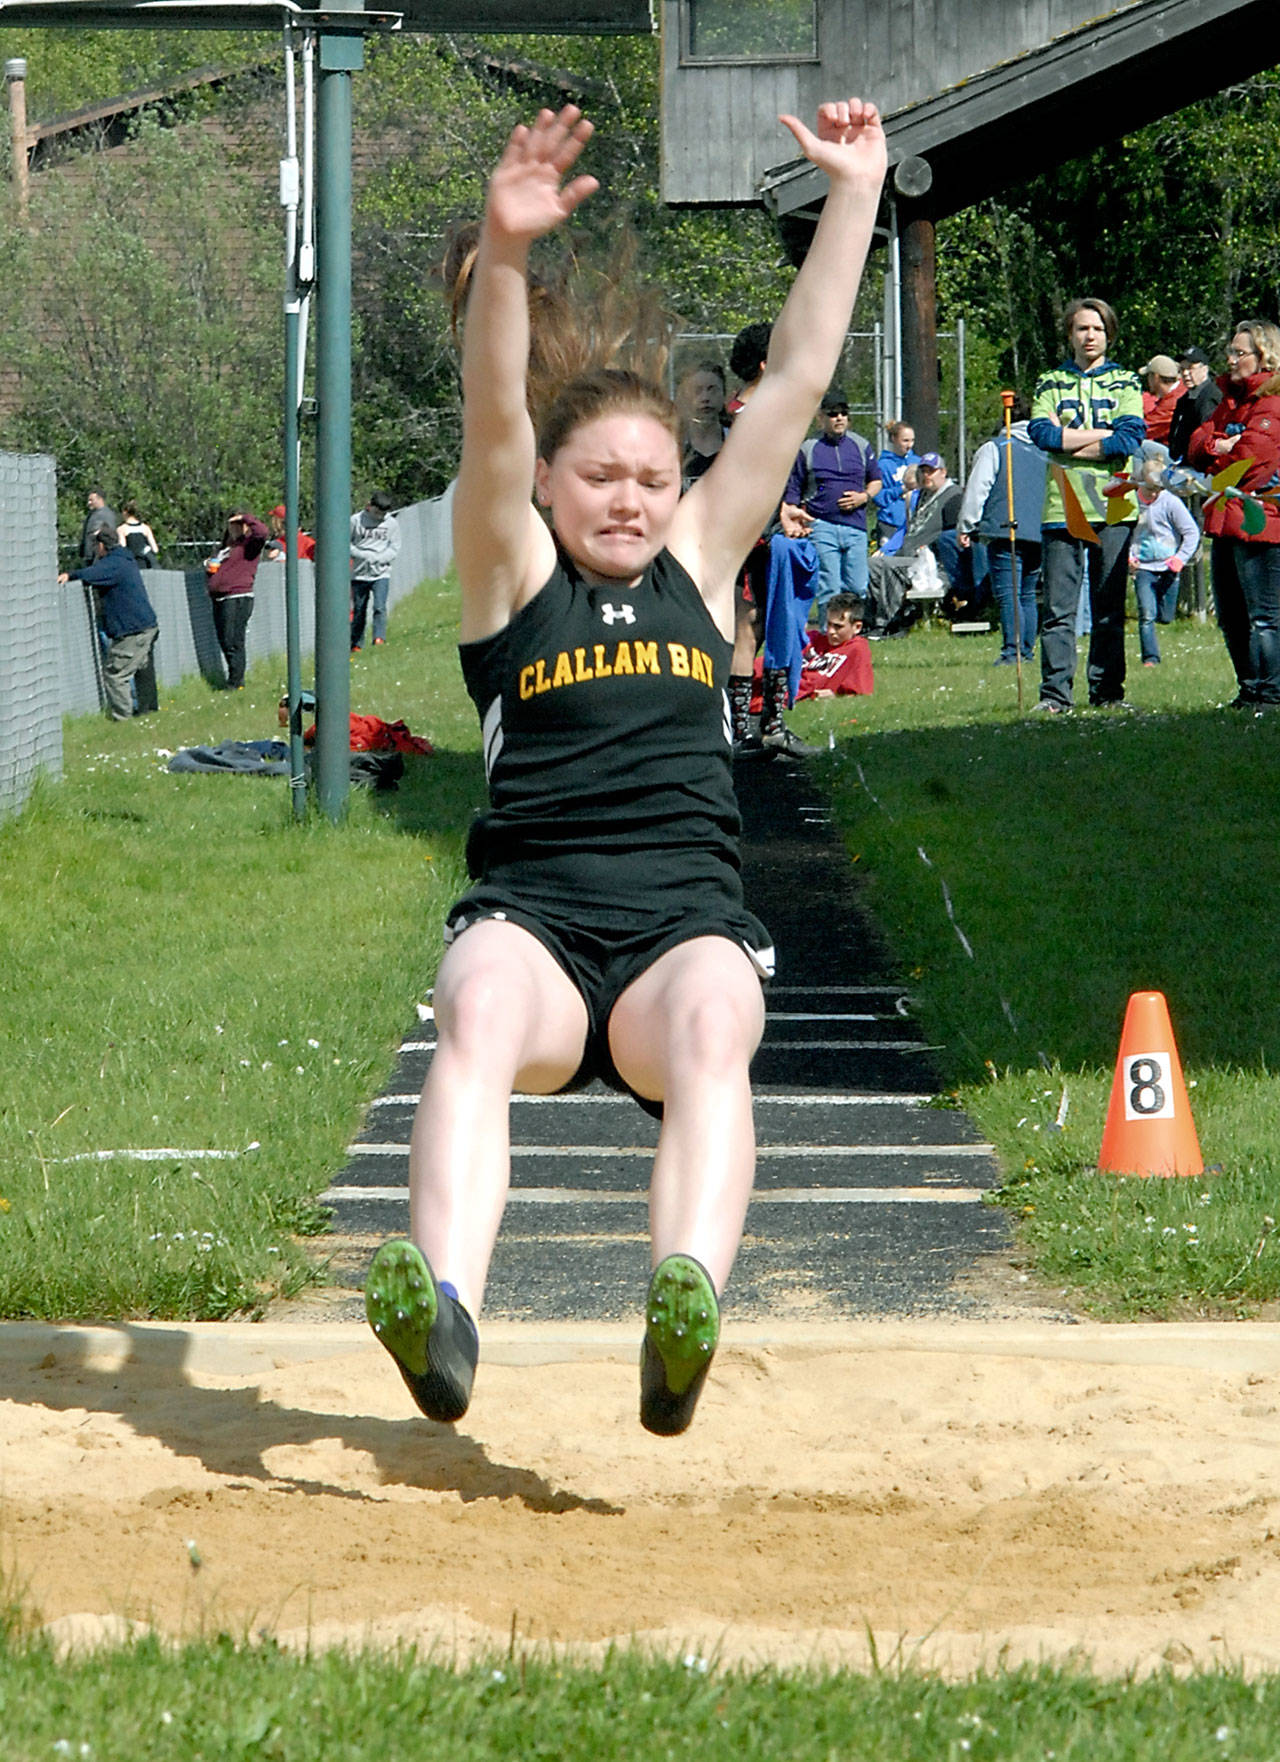 Keith Thorpe/Peninsula Daily News                                Hannah Olson of Clallam Bay competes in the long jump during the North Olympic League Sub District Meet at Crescent High School in Joyce.